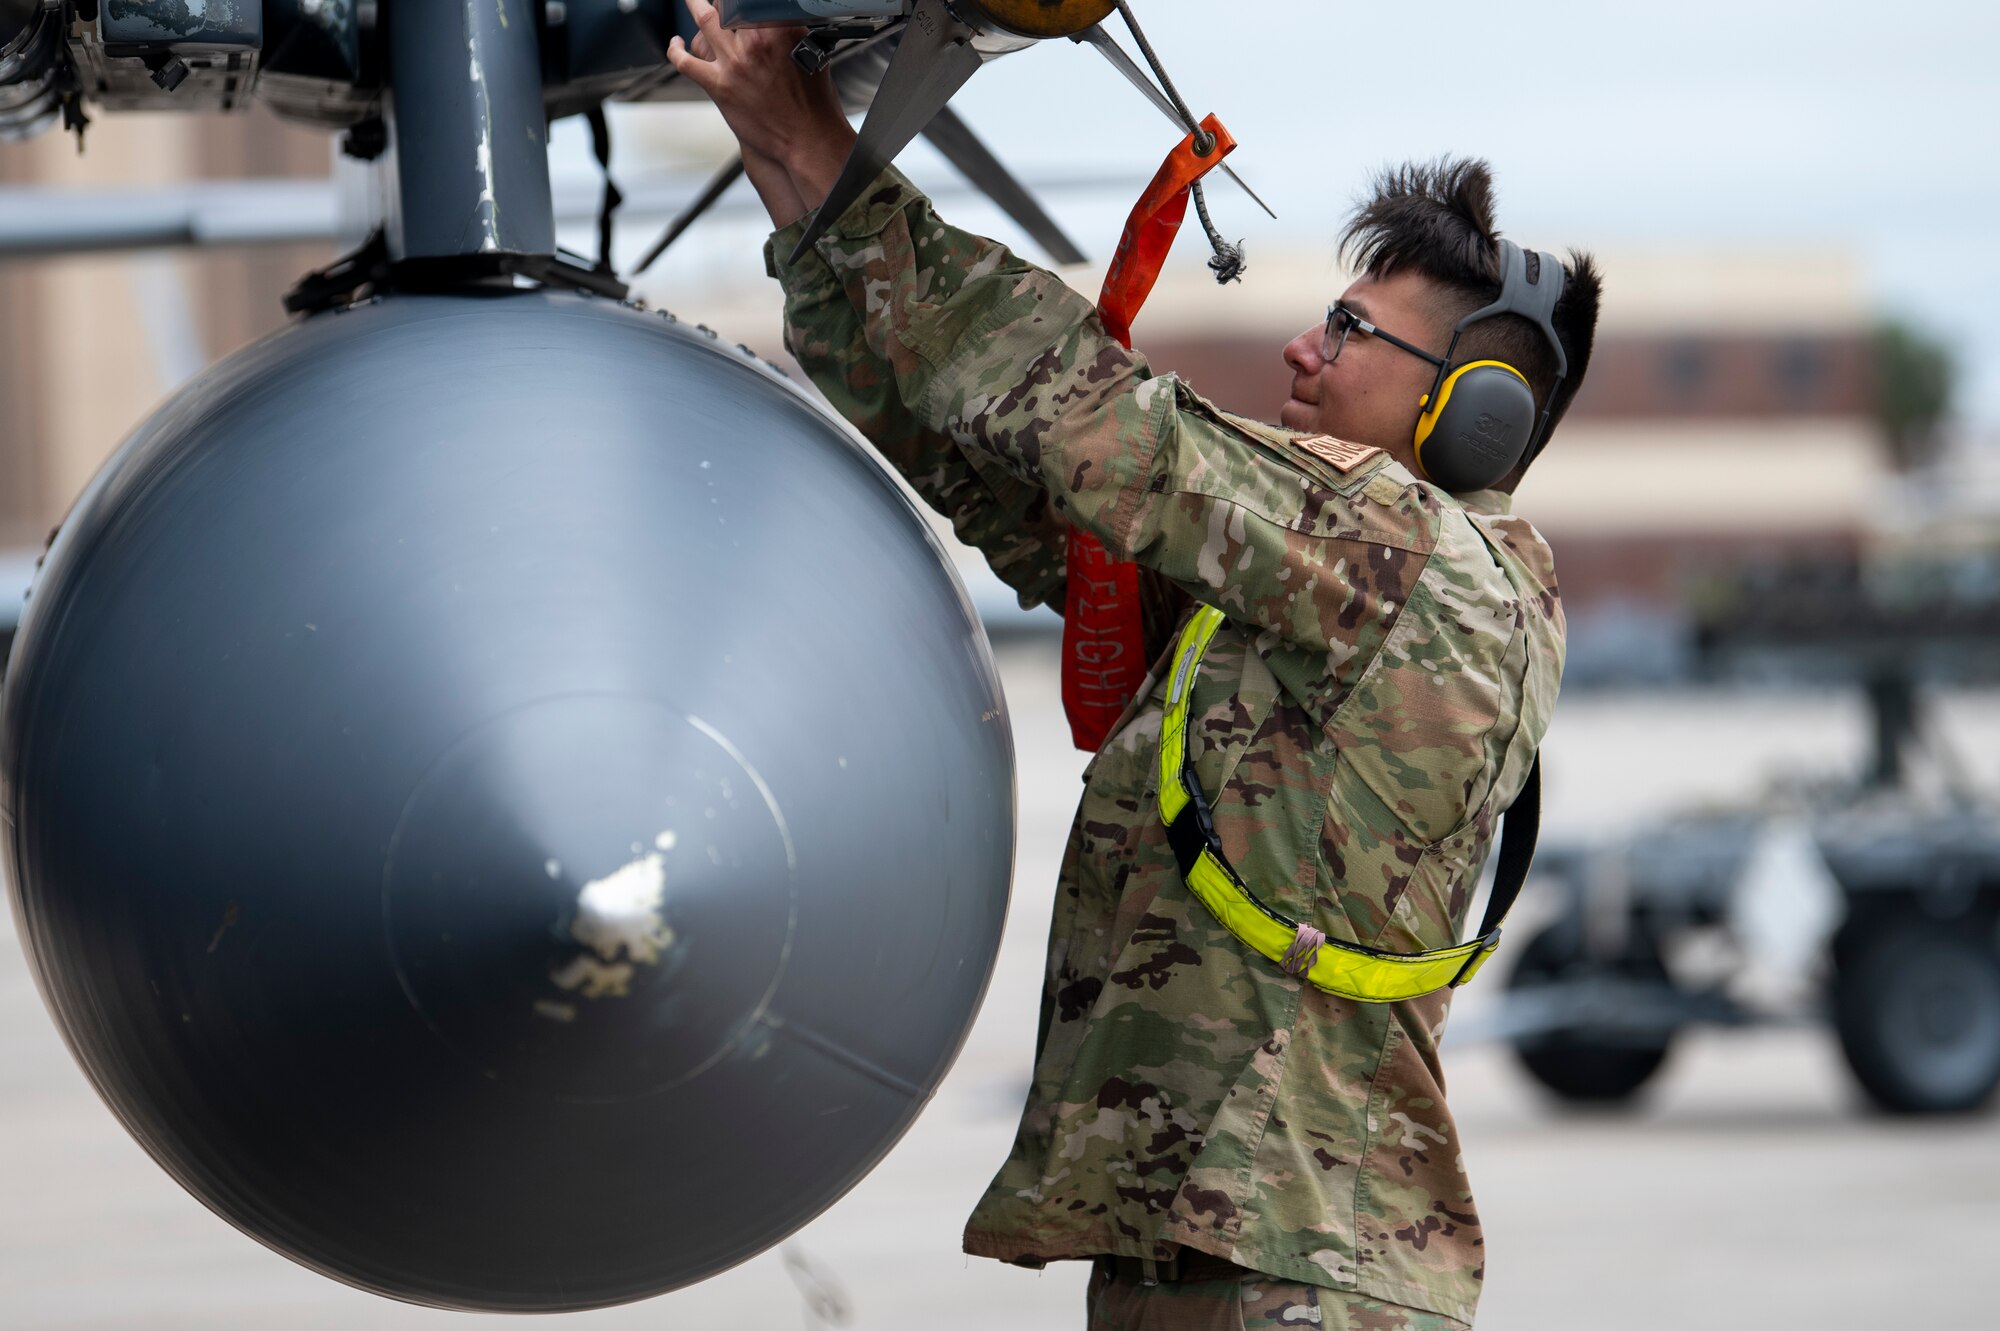 U.S. Air Force Airman secures missile onto aircraft